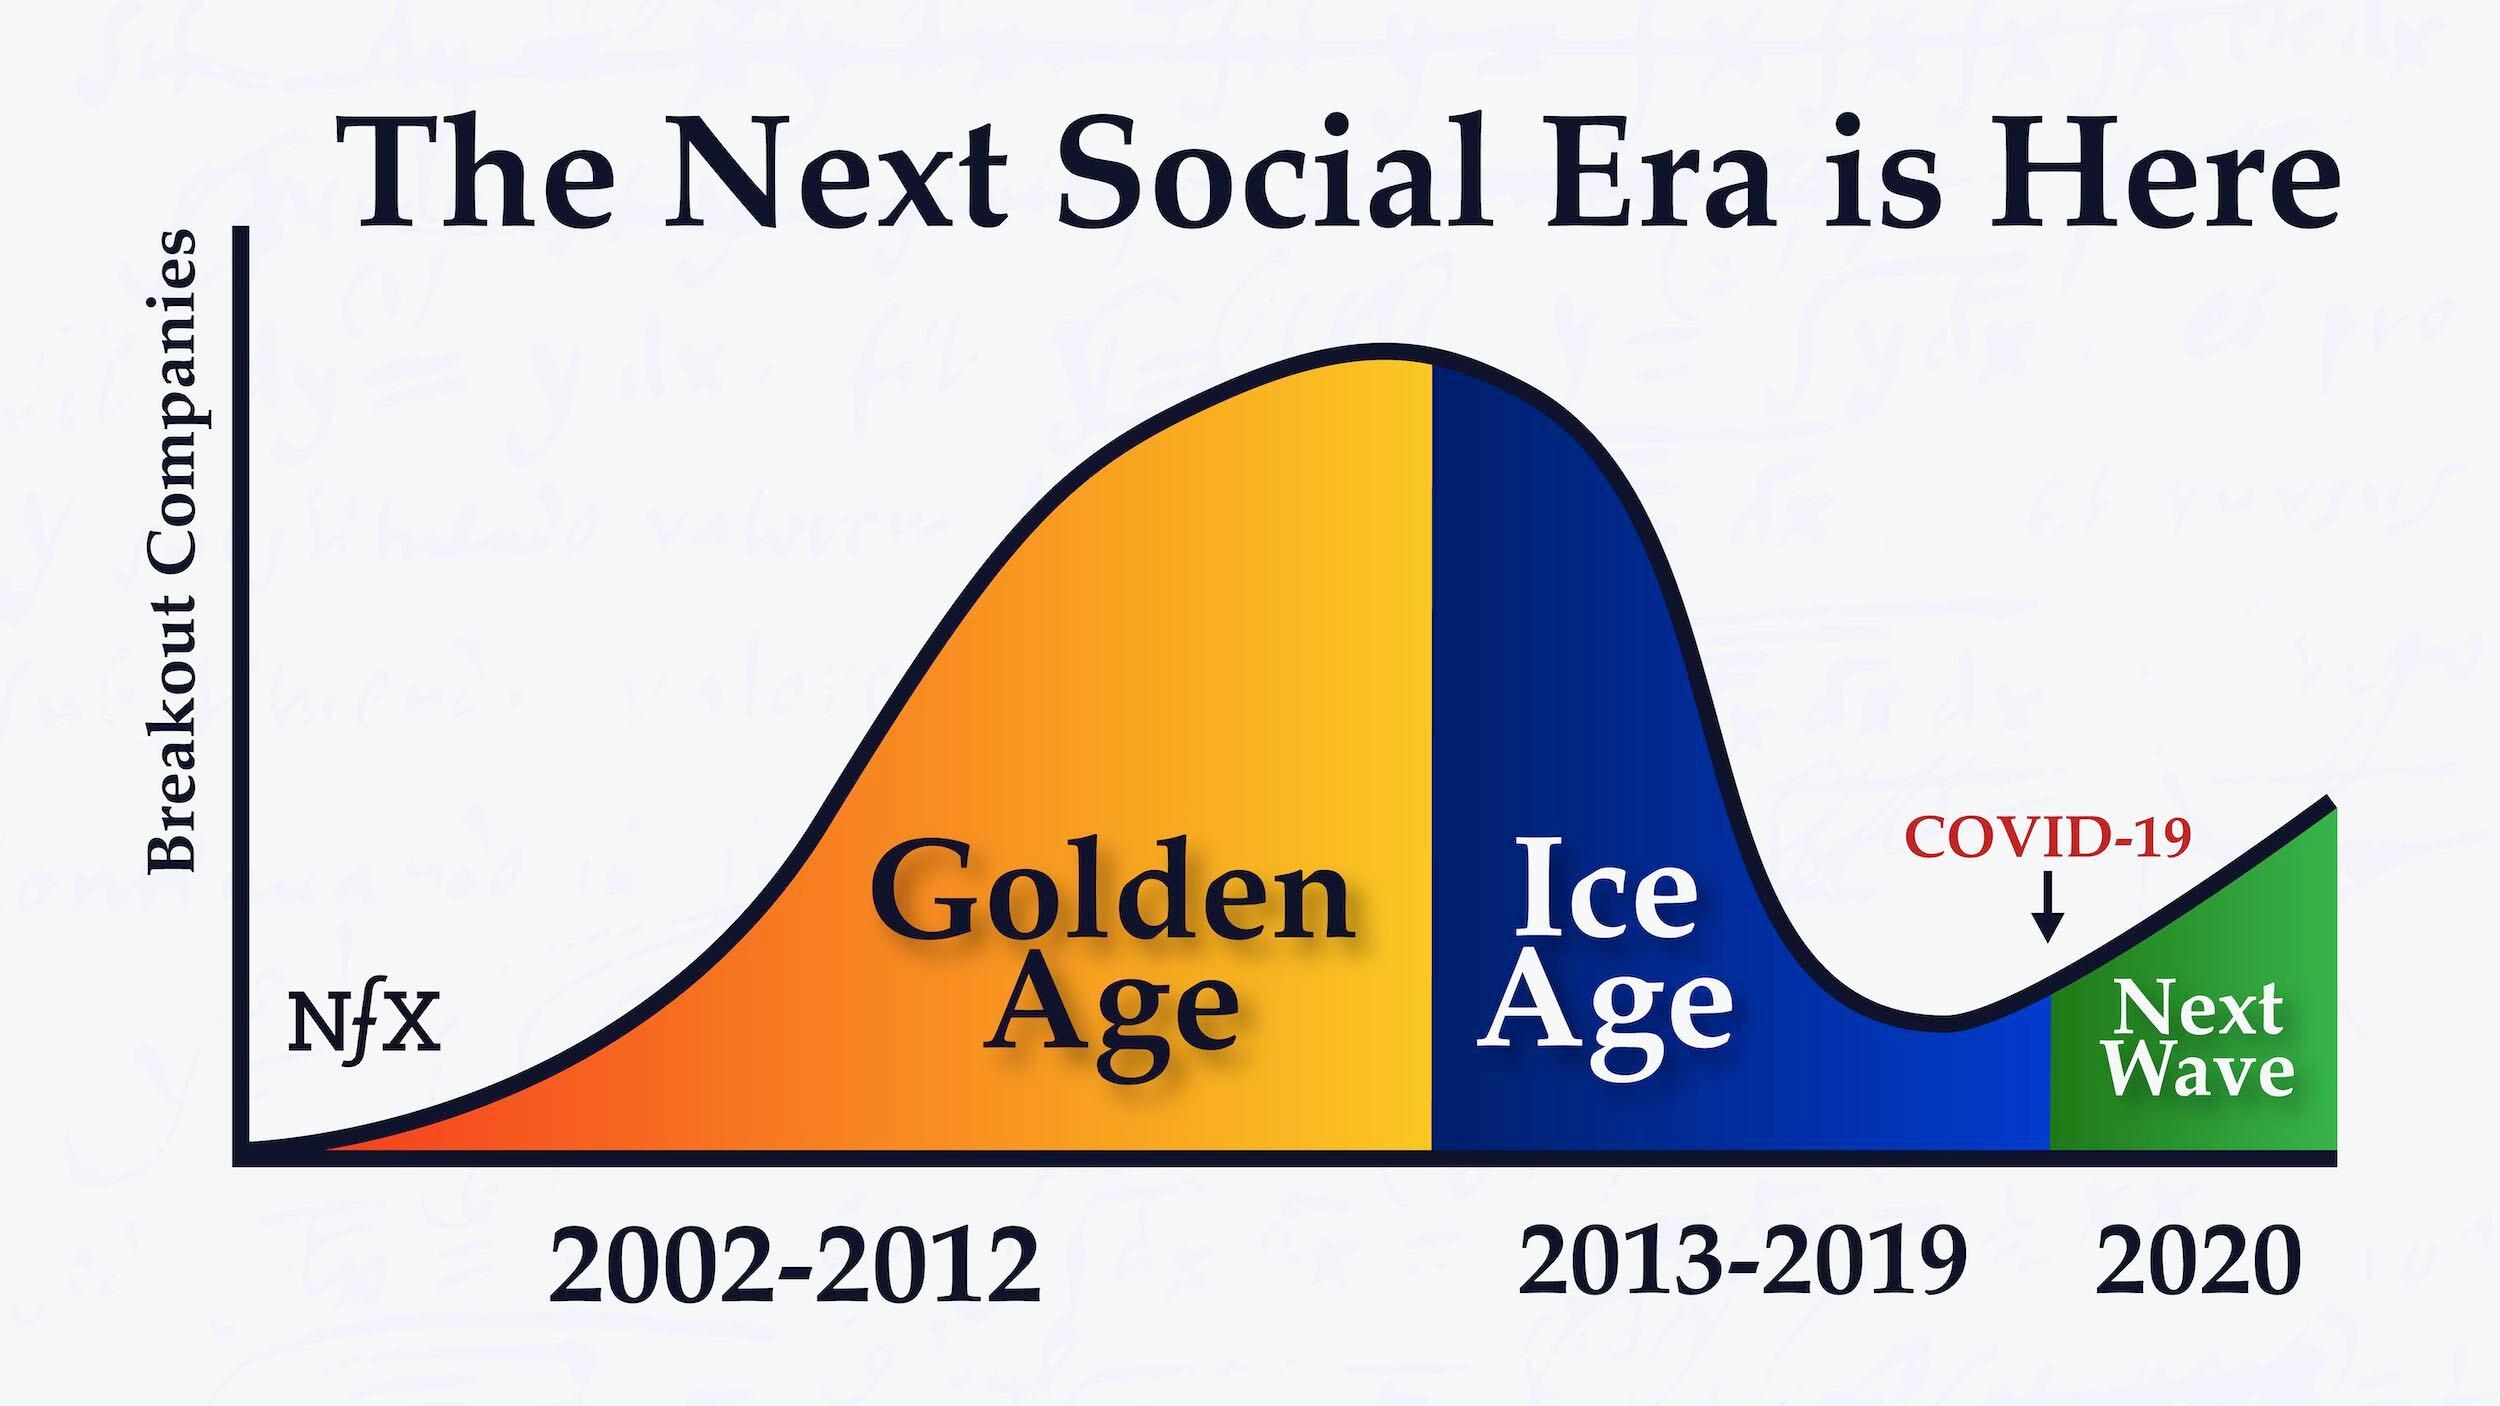 The Next Social Era is Here